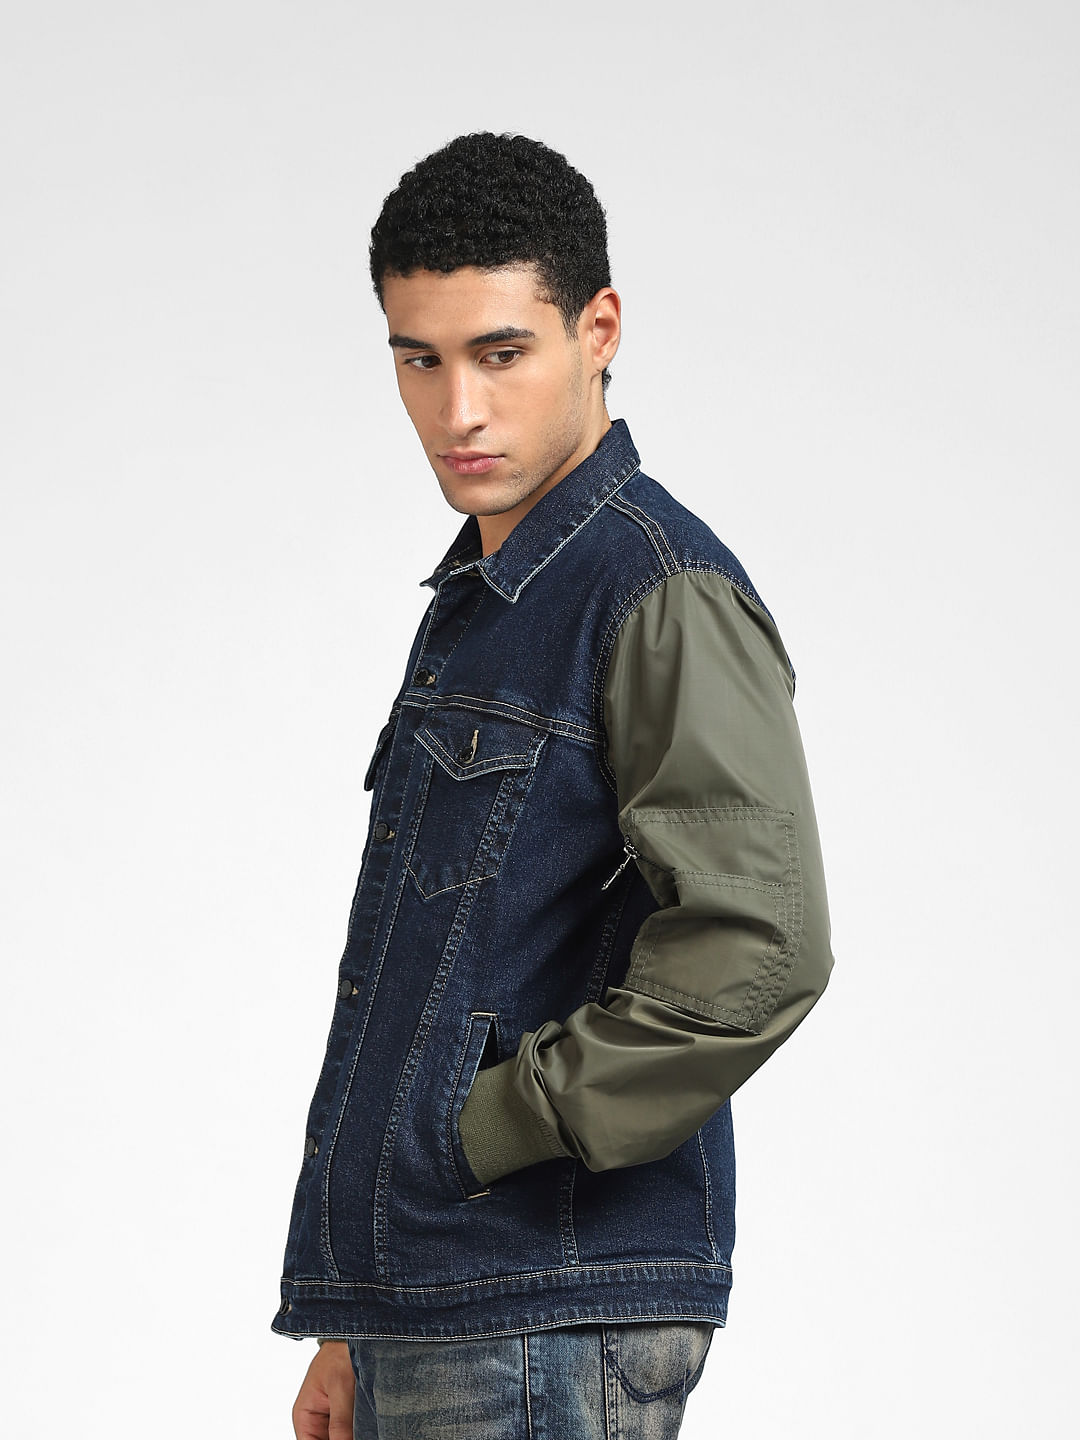 What is the best season to wear a denim jacket? - Quora